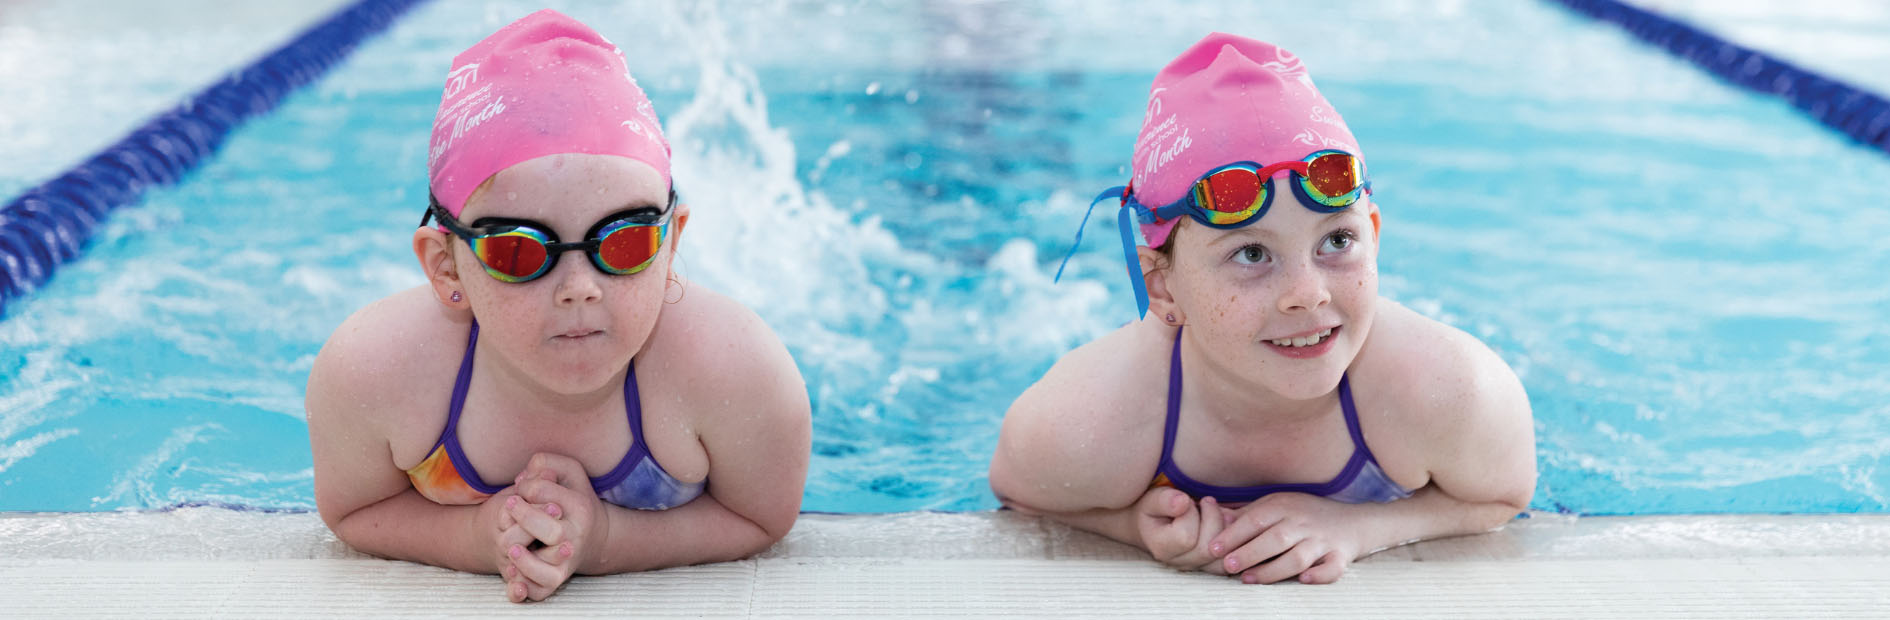 Two children lean on the edge of the pool and kick the pool water